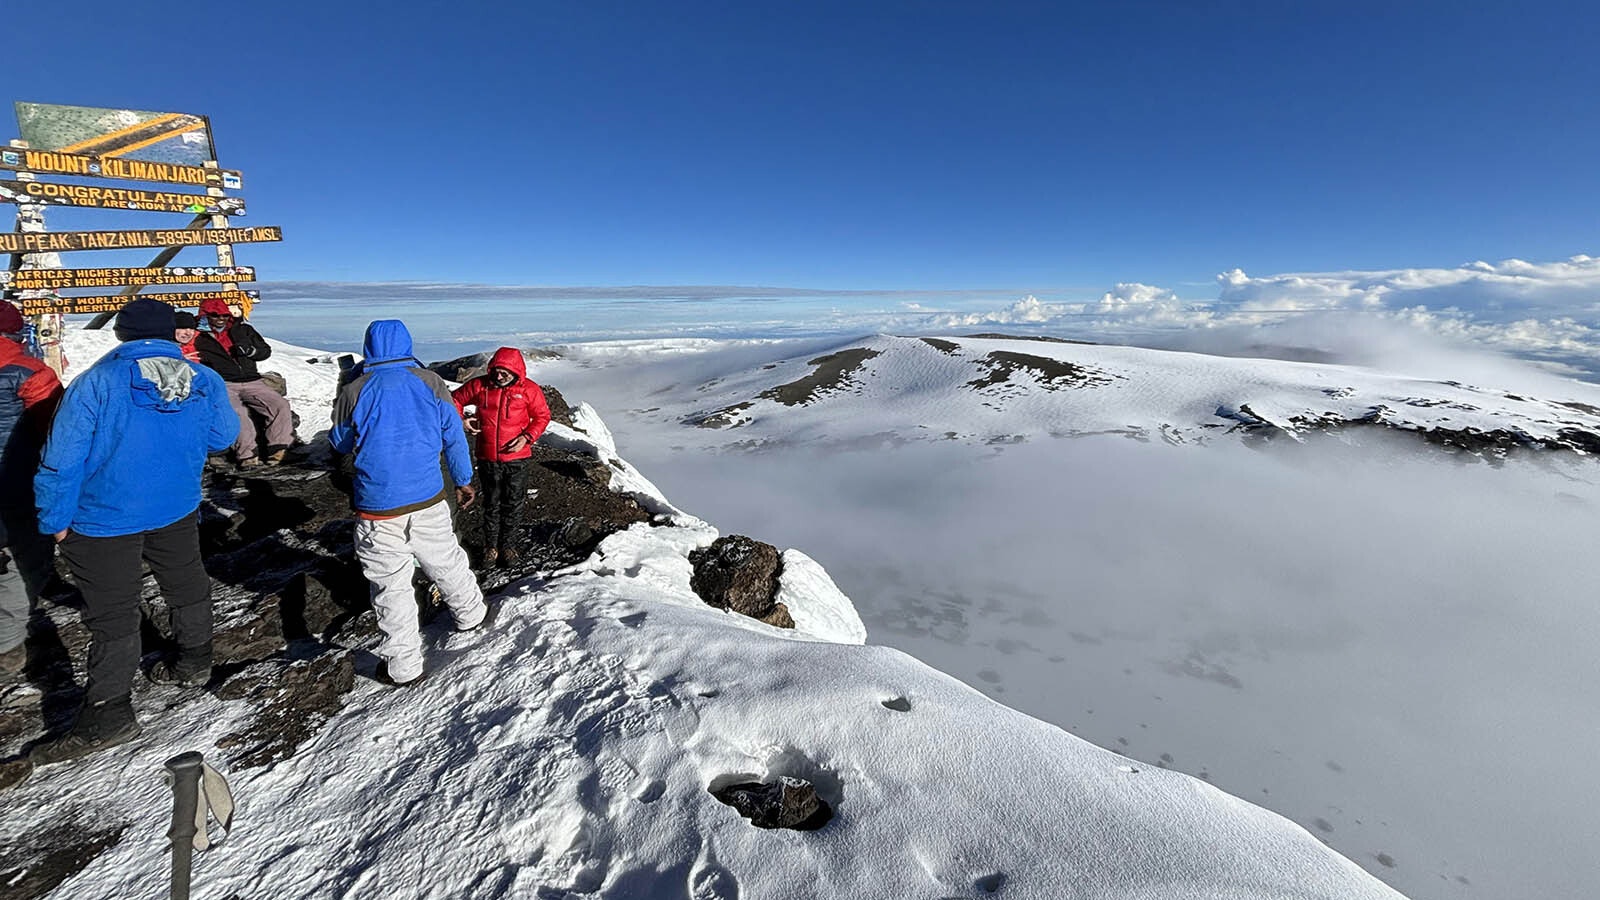 The view from the top of Kilimanjaro.